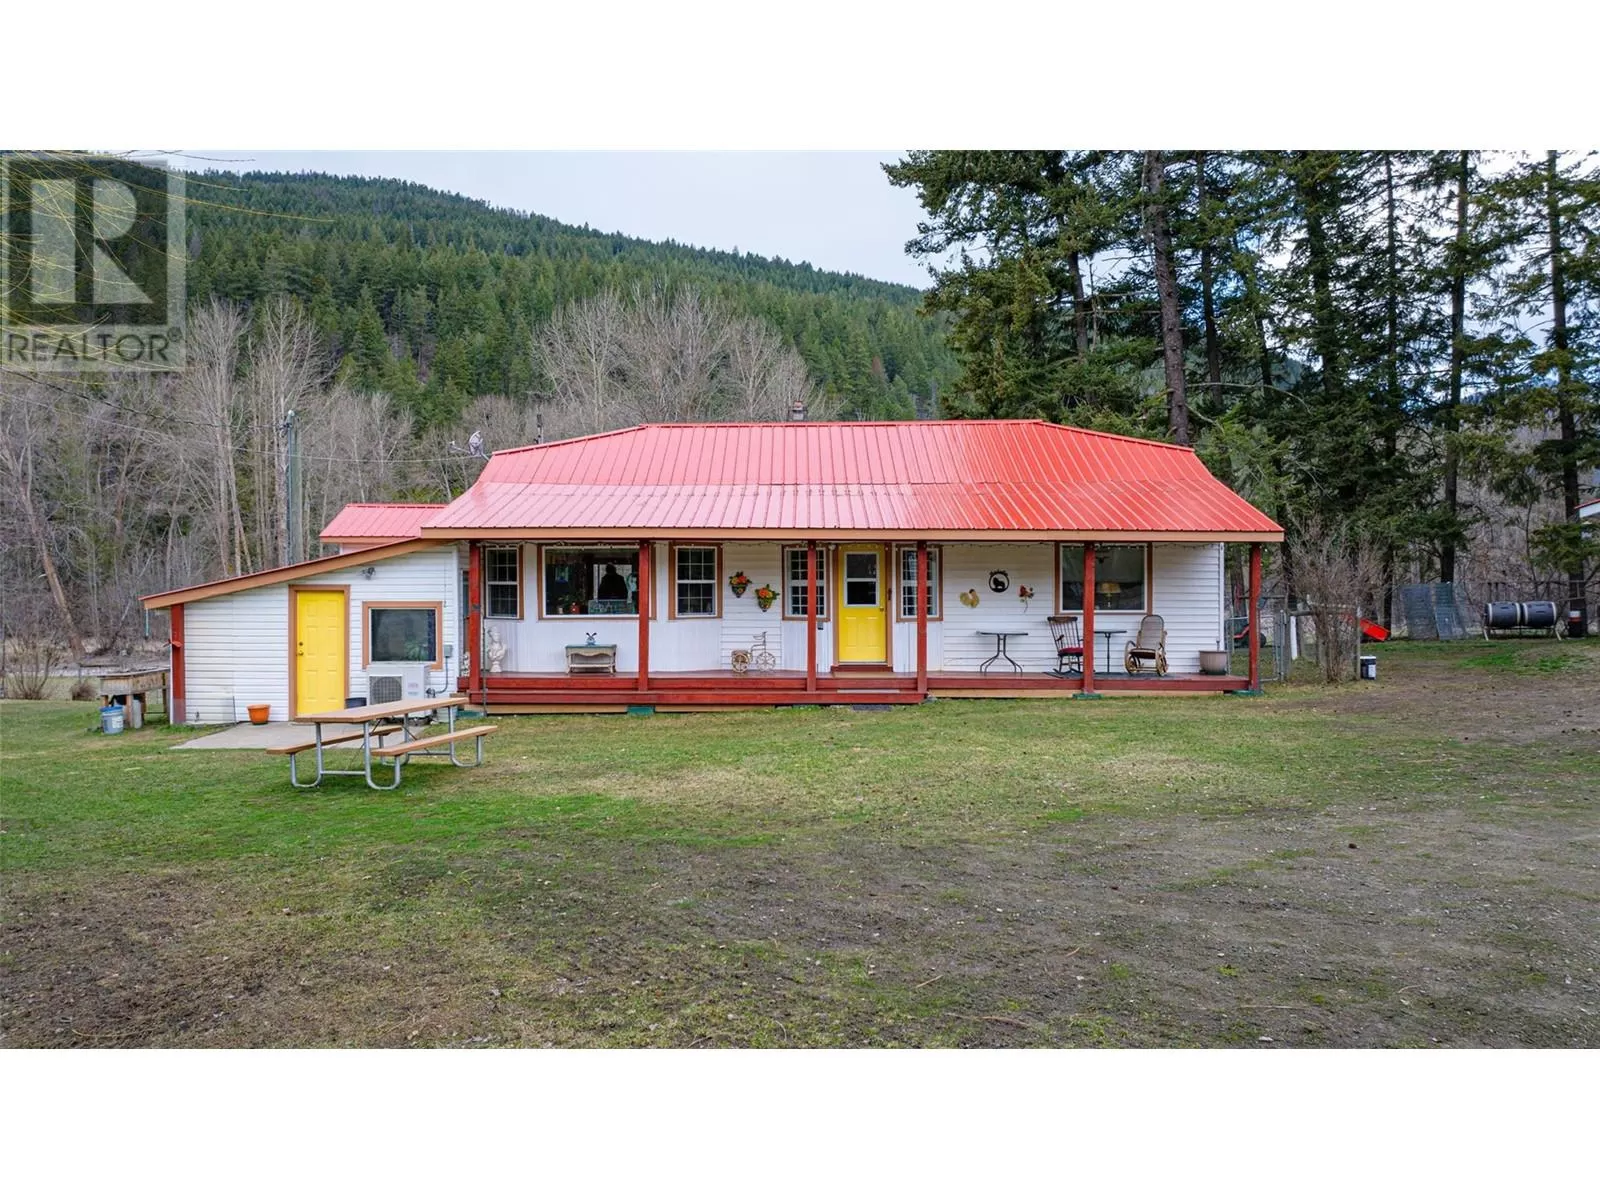 House for rent: 5409 Hwy 97n Highway, Falkland, British Columbia V0E 1W0